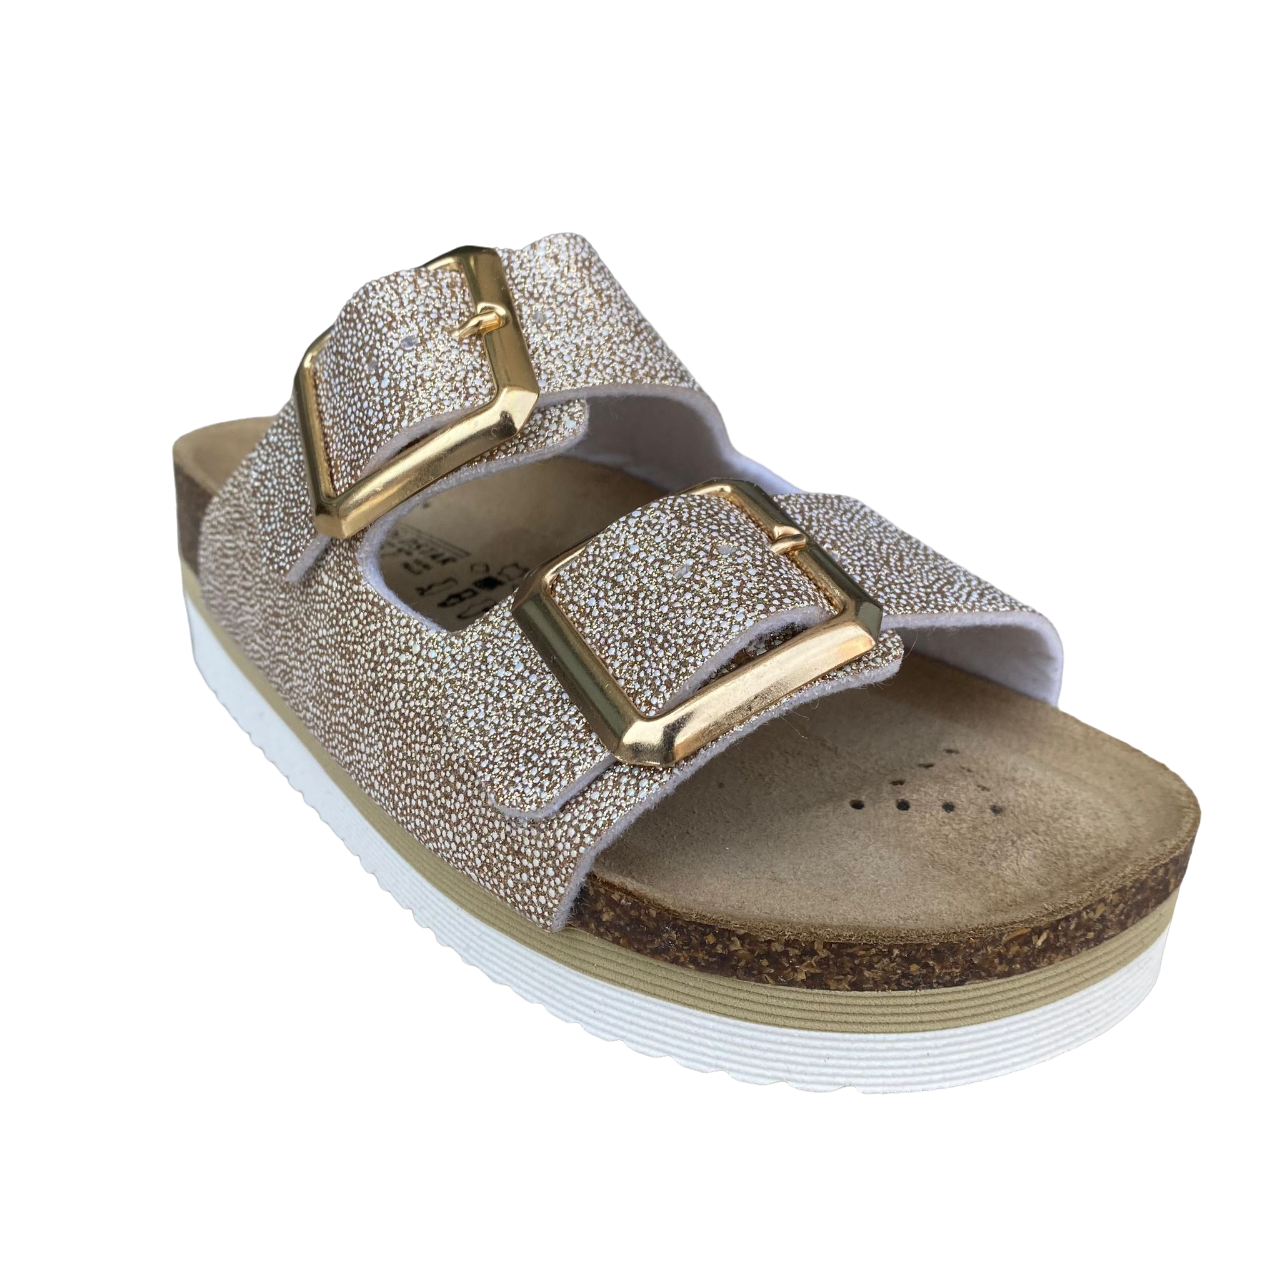 Goldstar women&#39;s slipper in leather insole with 2 glittery bands and golden buckle GS4801QBK platinum